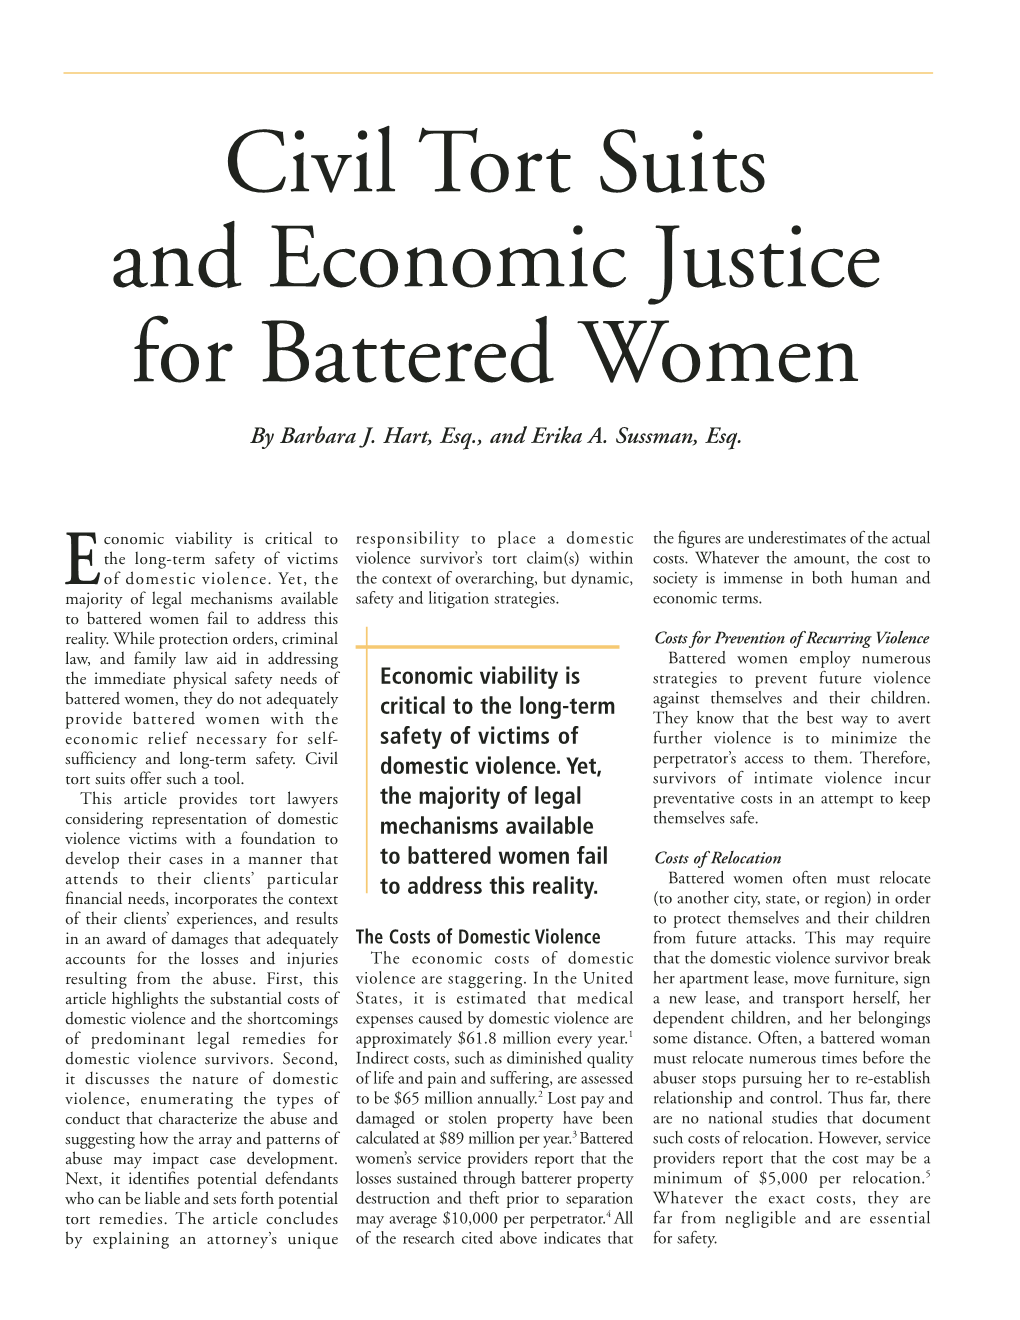 Civil Tort Suits and Economic Justice for Battered Women by Barbara J